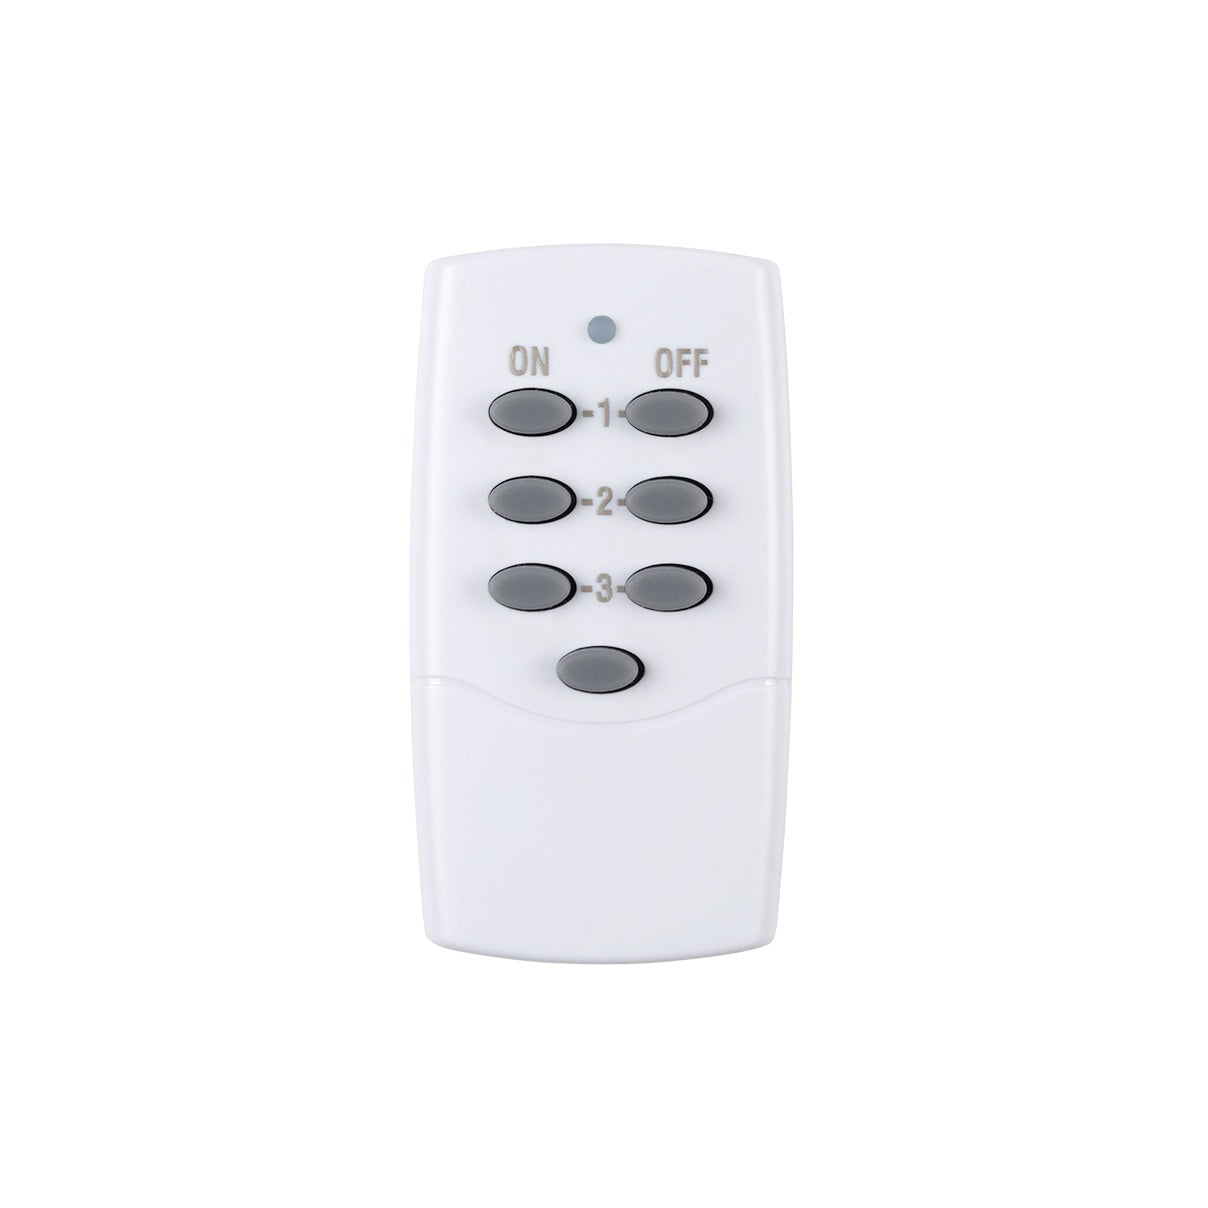 BN-LINK Replacement Remote Control 3x1 (Model C) - BN-LINK